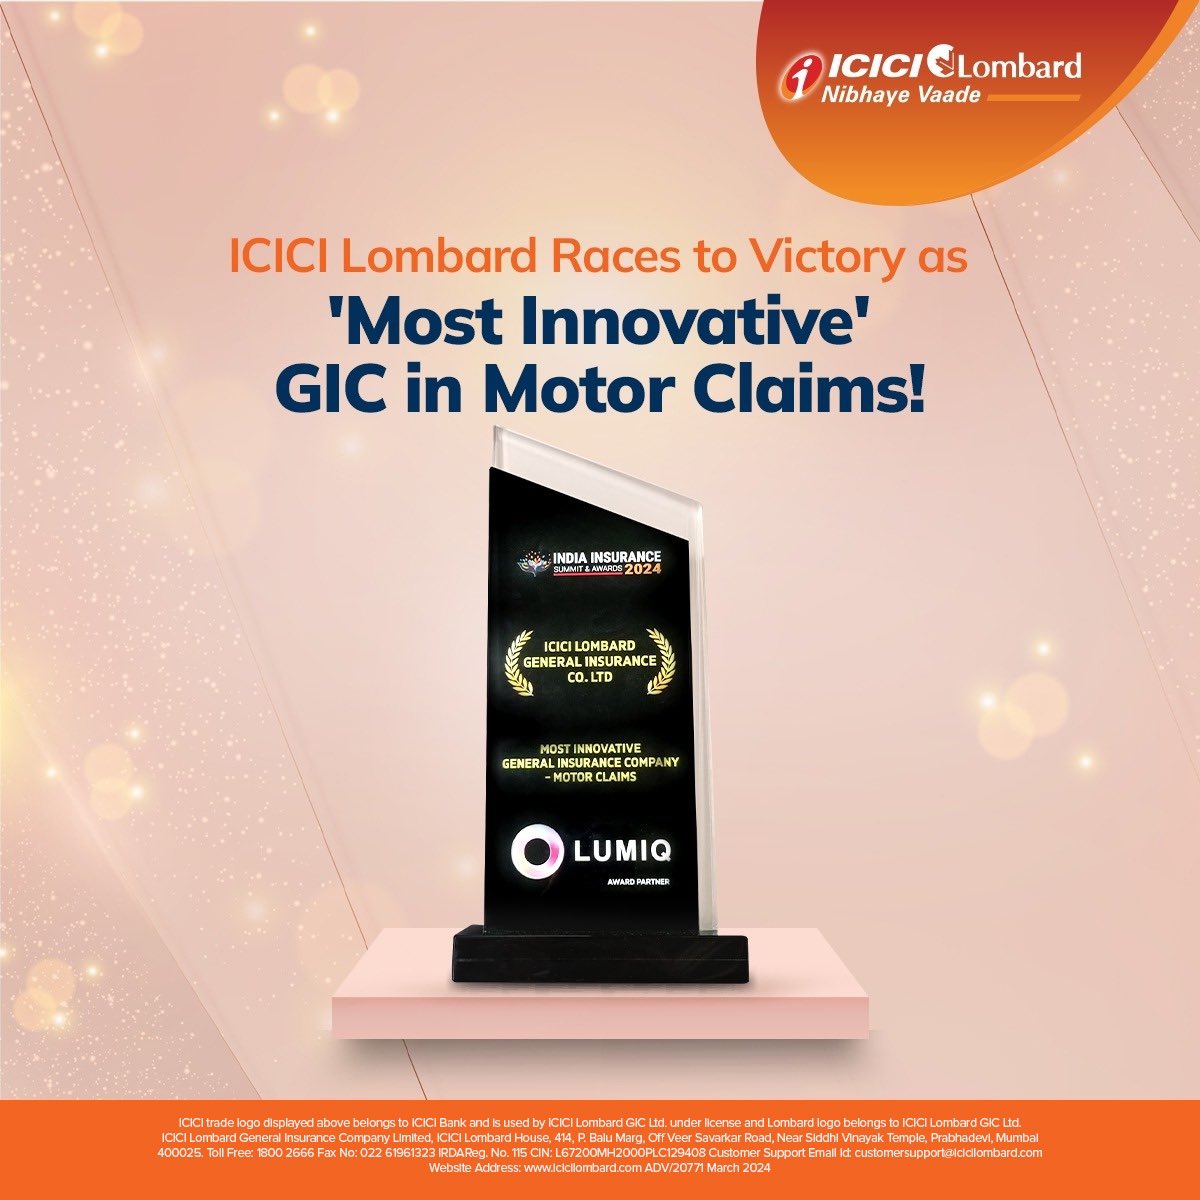 Honored to be recognized as ‘Most Innovative’ General Insurance Company in Motor Claims at the India Insurance Summit 2024. 🏆 
This recognition fuels our passion to revolutionize the insurance industry and enhance your experience behind the wheel.

#ICICILombard #NibhayeVaade